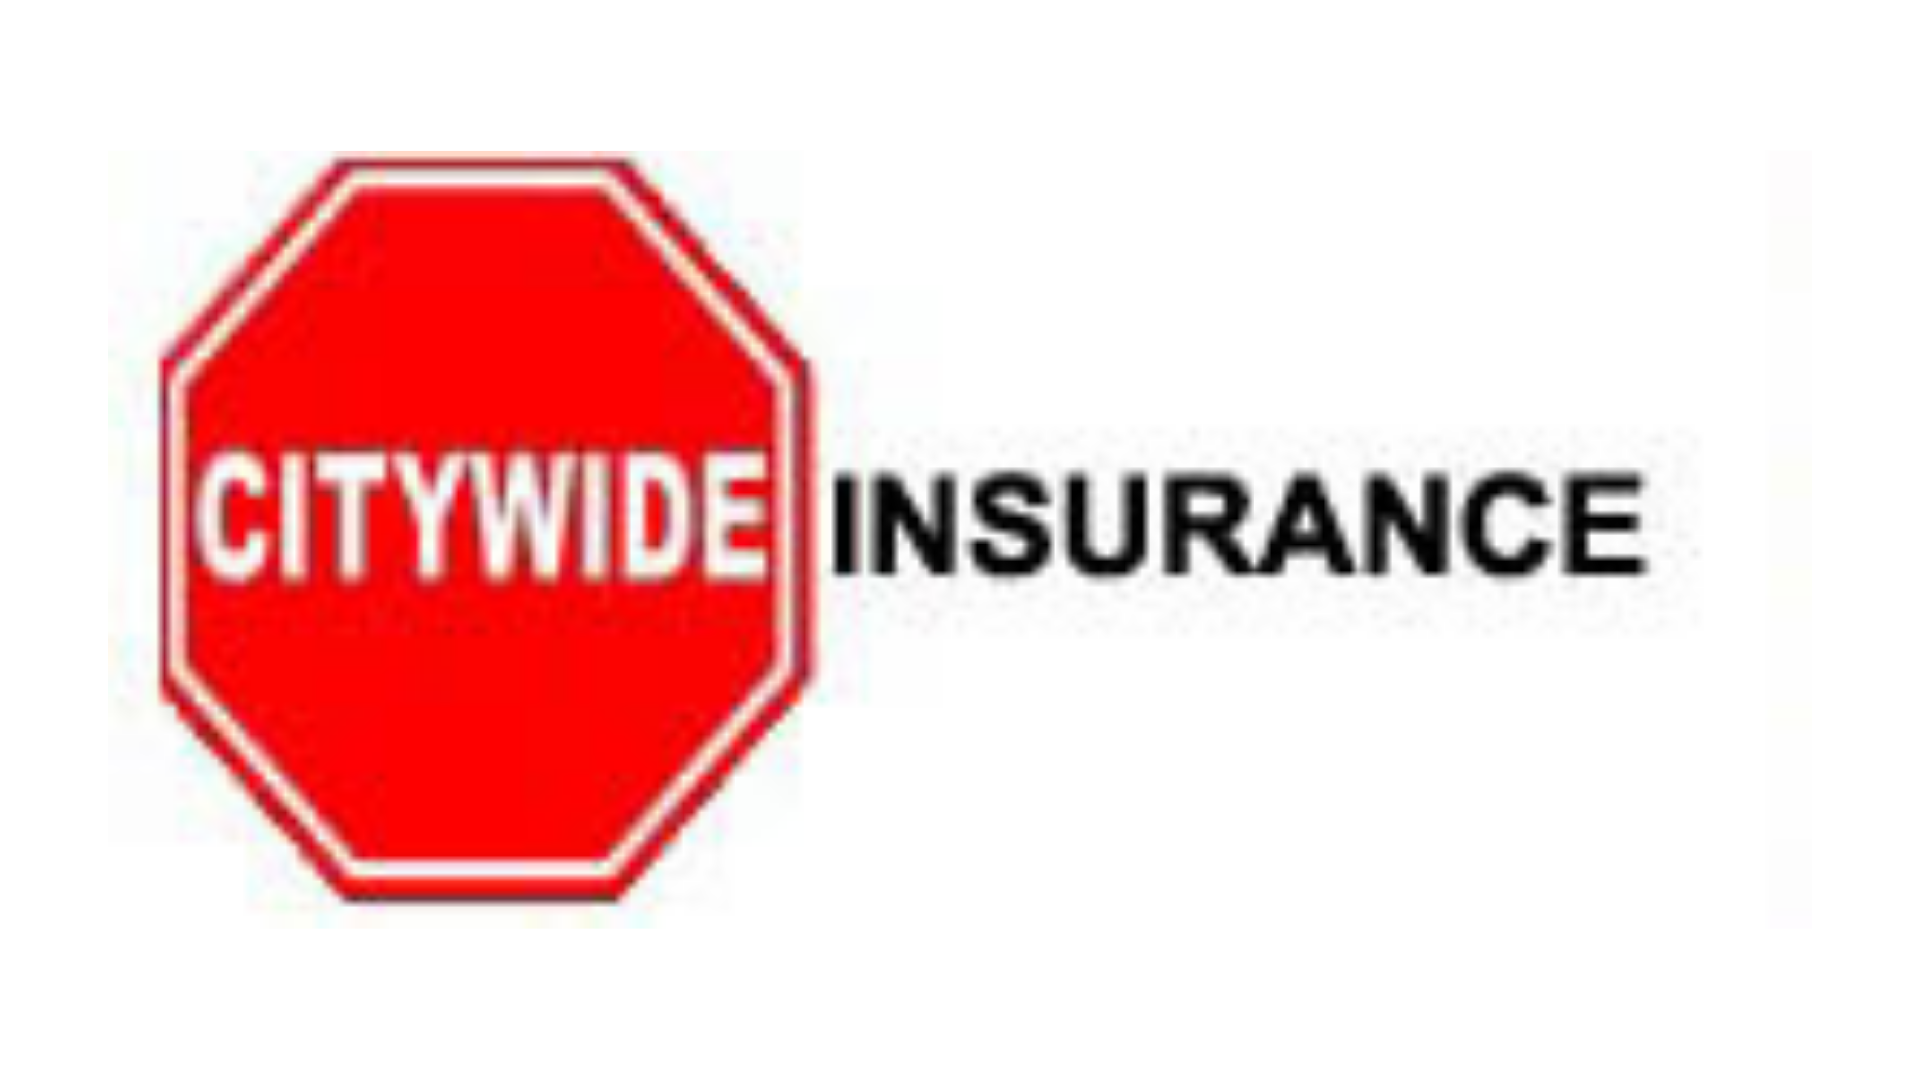 Citywide Insurance